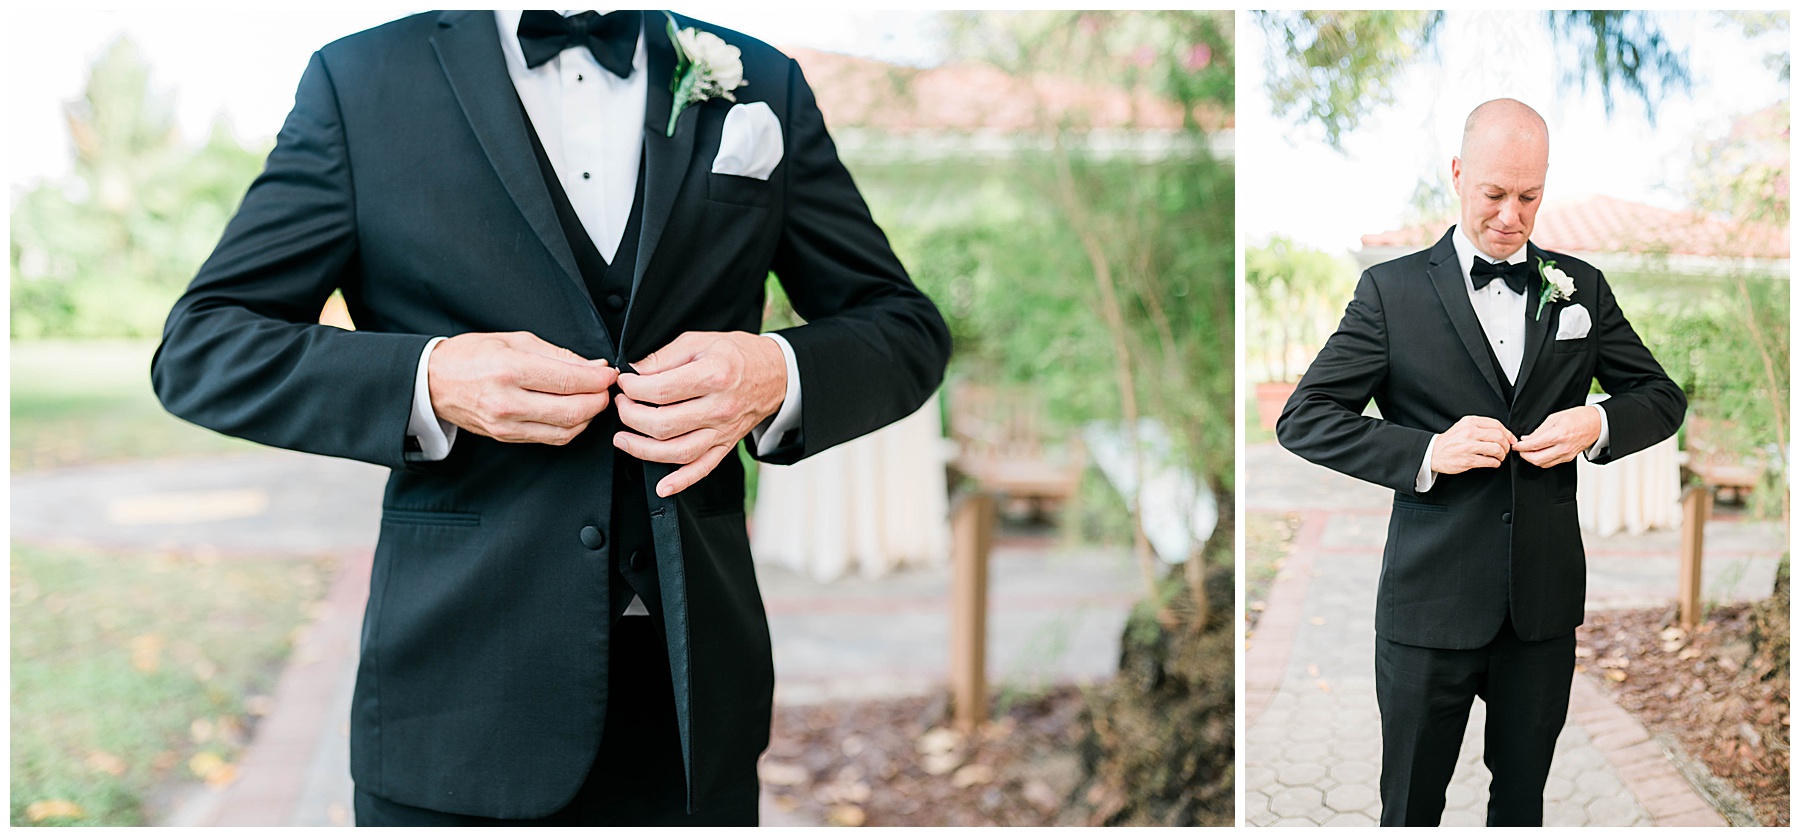 groom gets ready on Southwest Florida wedding day with black tuxedo and white floral boutonnière